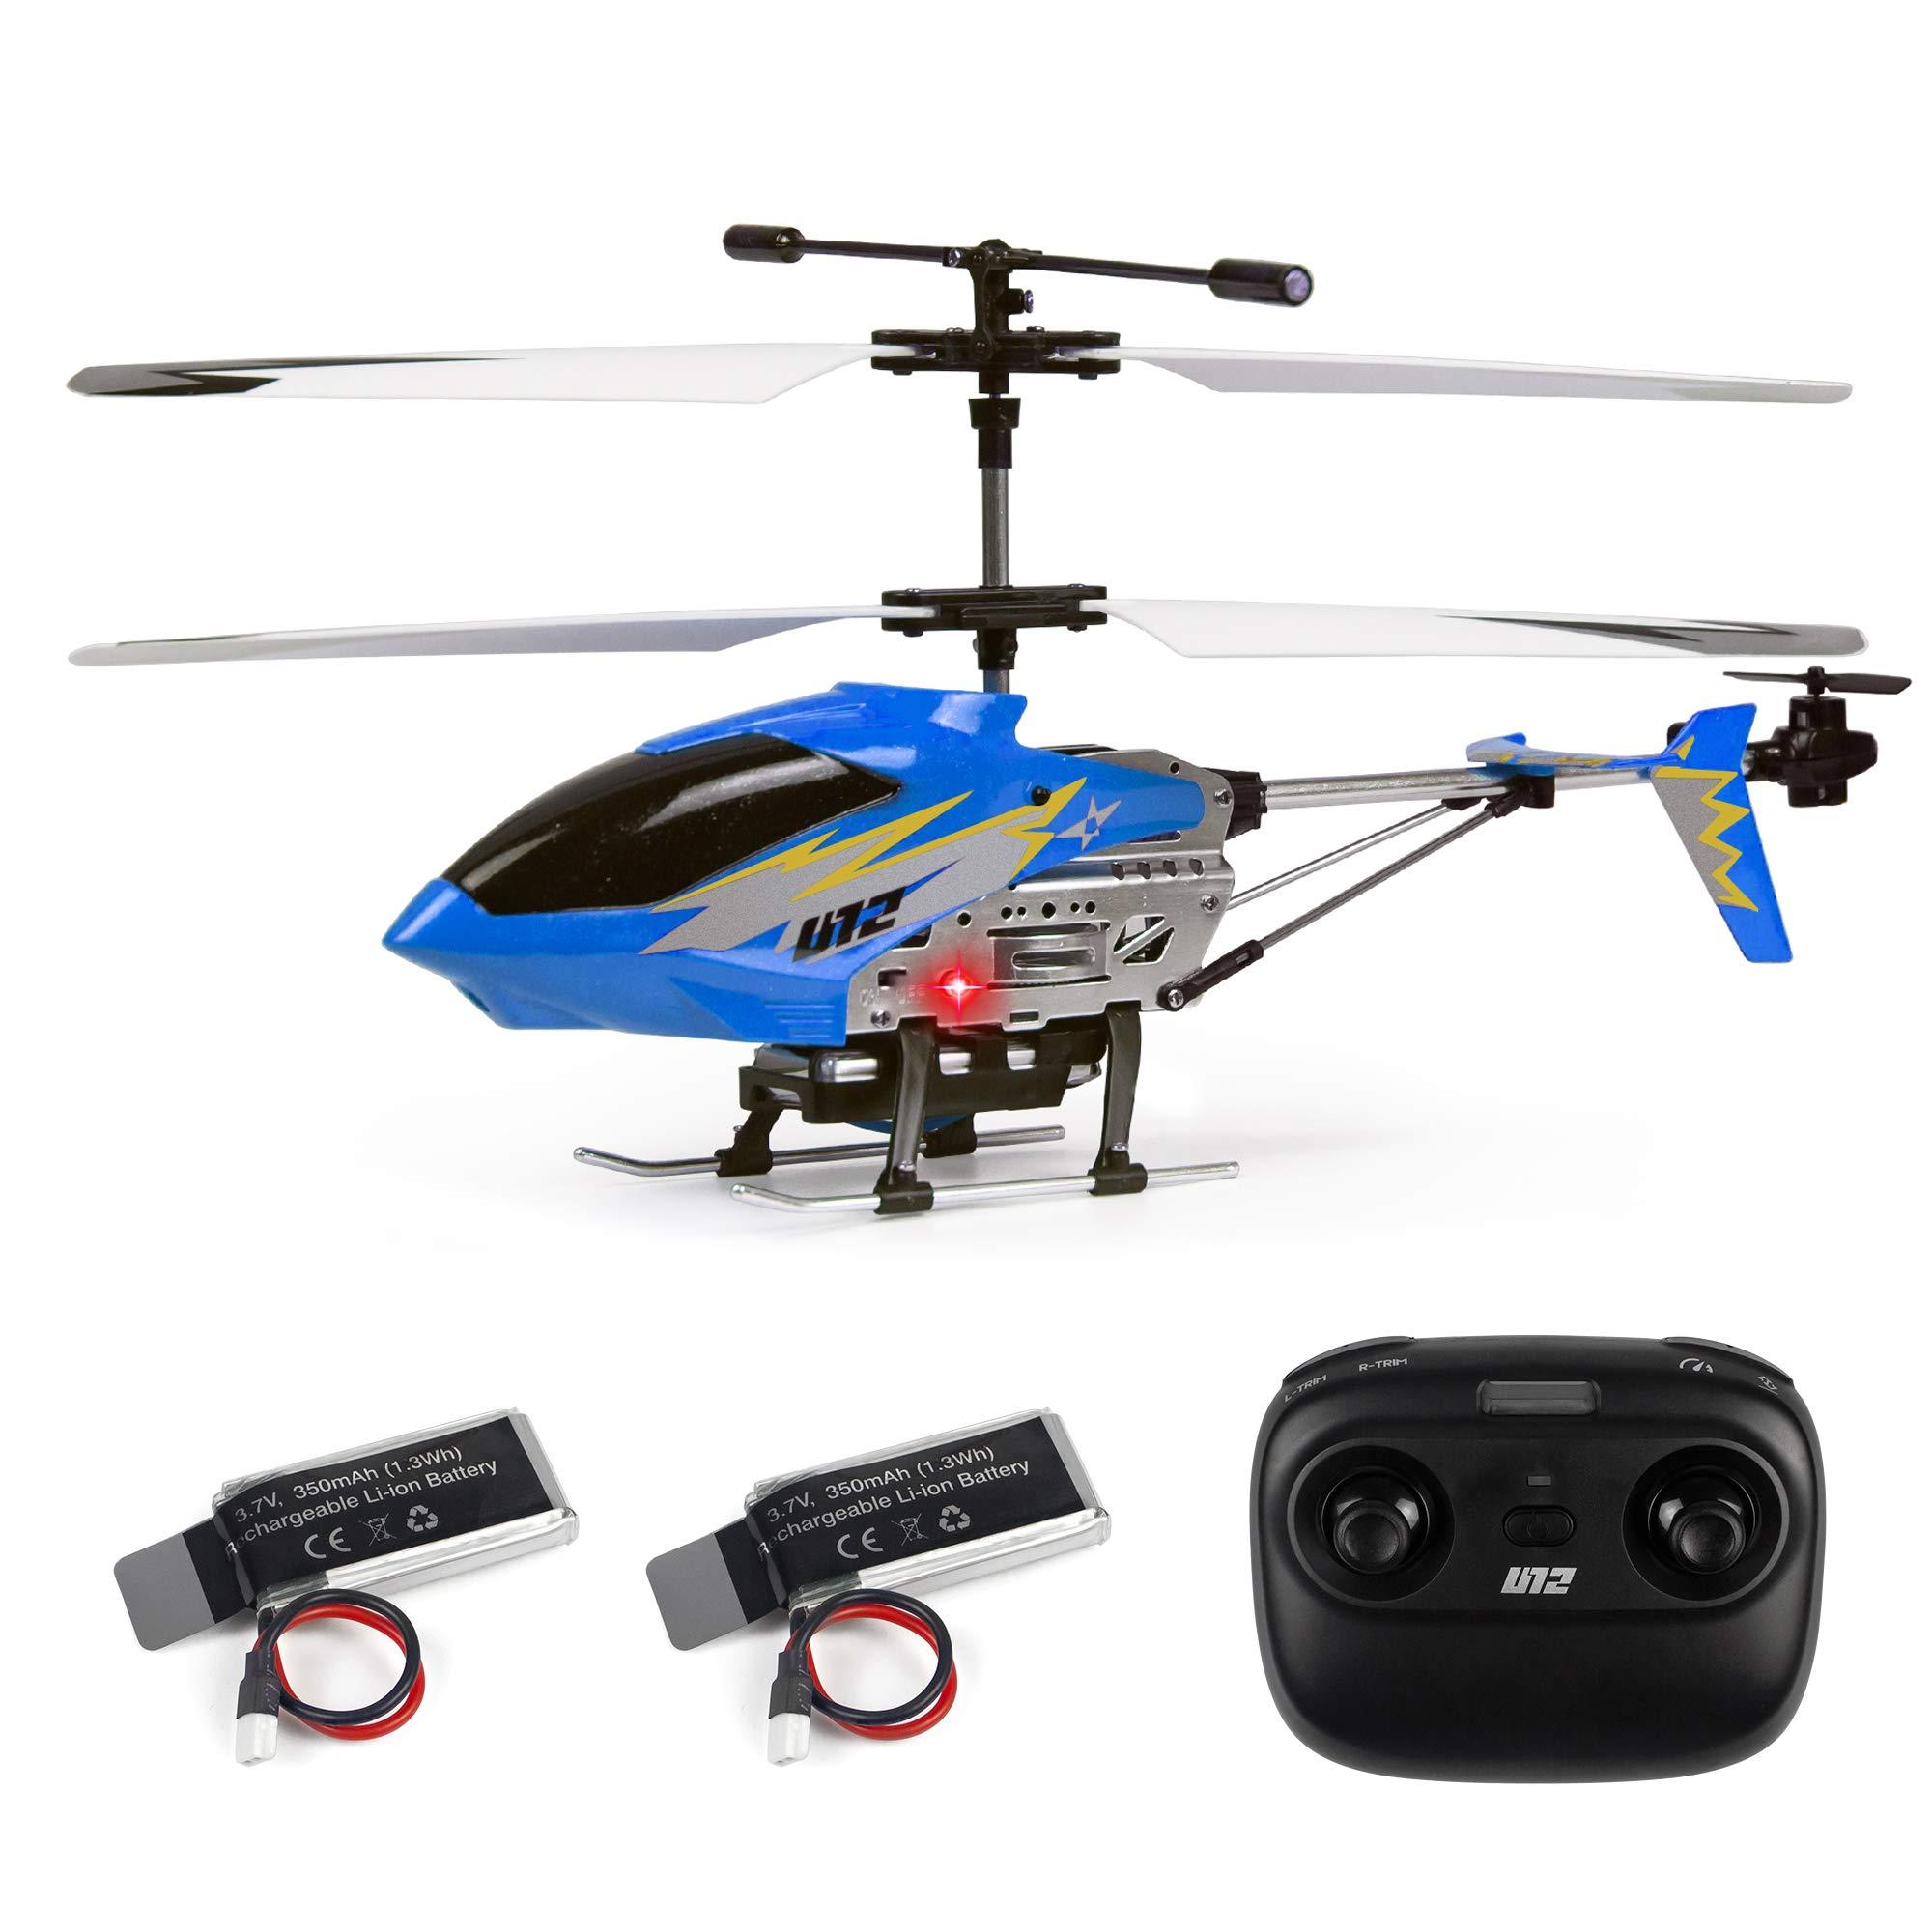 Eachine Rc Heli: Utilize These Resources to Join the Eachine RC Heli Community